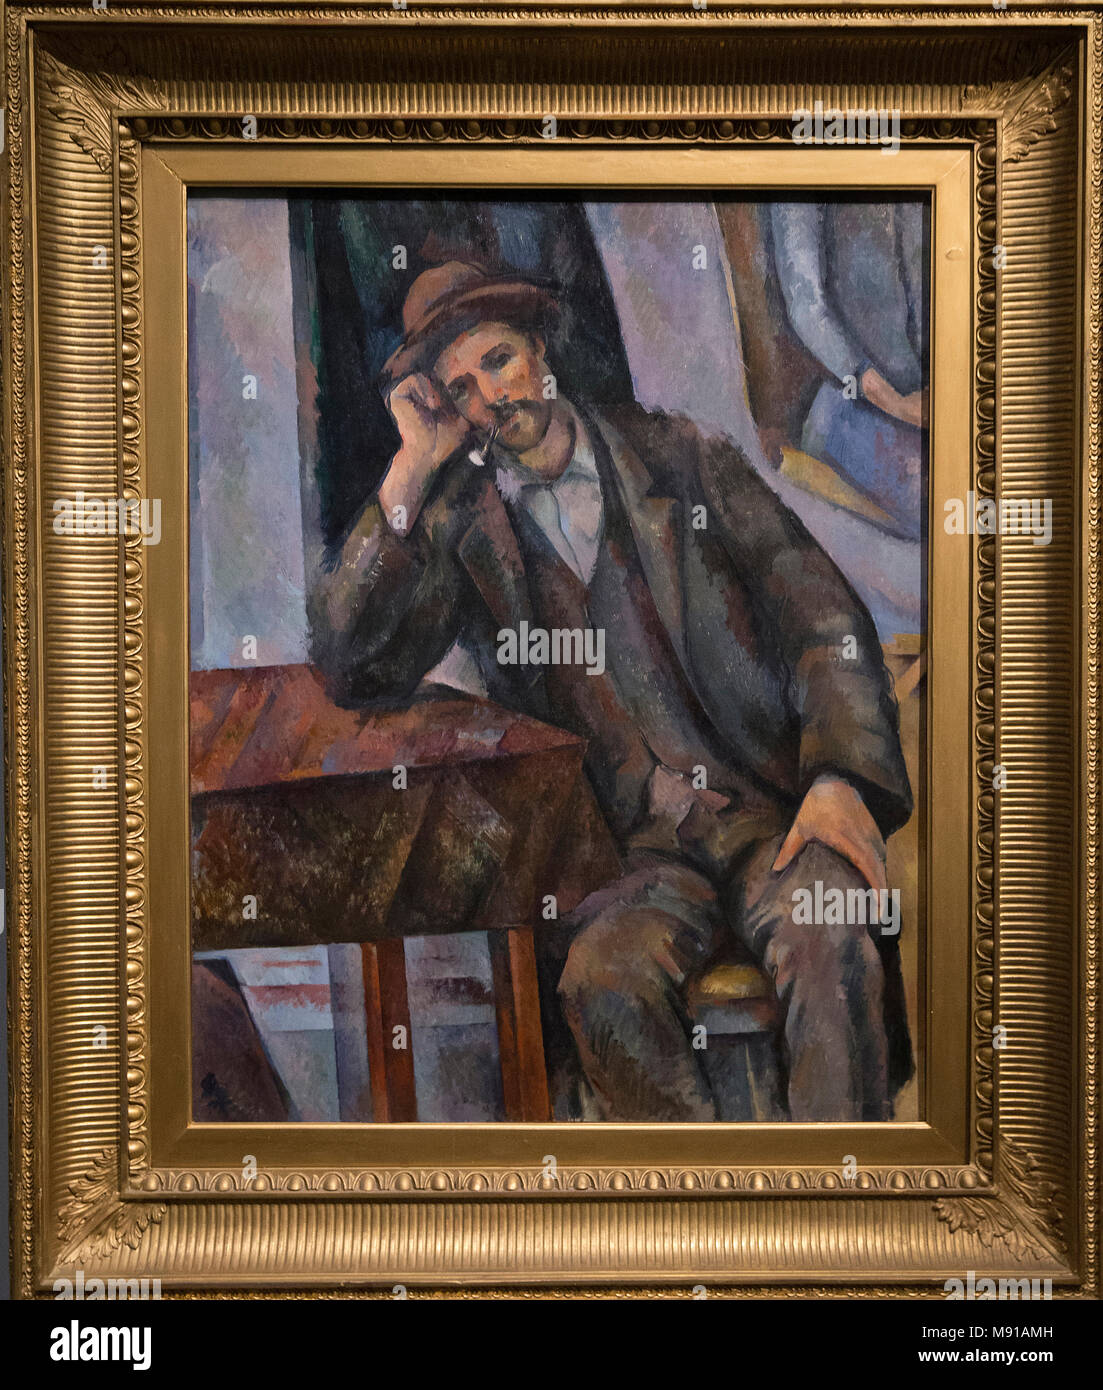 Paul Cezanne, Man smoking a pipe, Aix-en-Provence, 1890-1893, oil on canvas. Shchukin Collection, Pushkin Fine Art Museum, Moskow. Shot while exhibite Stock Photo